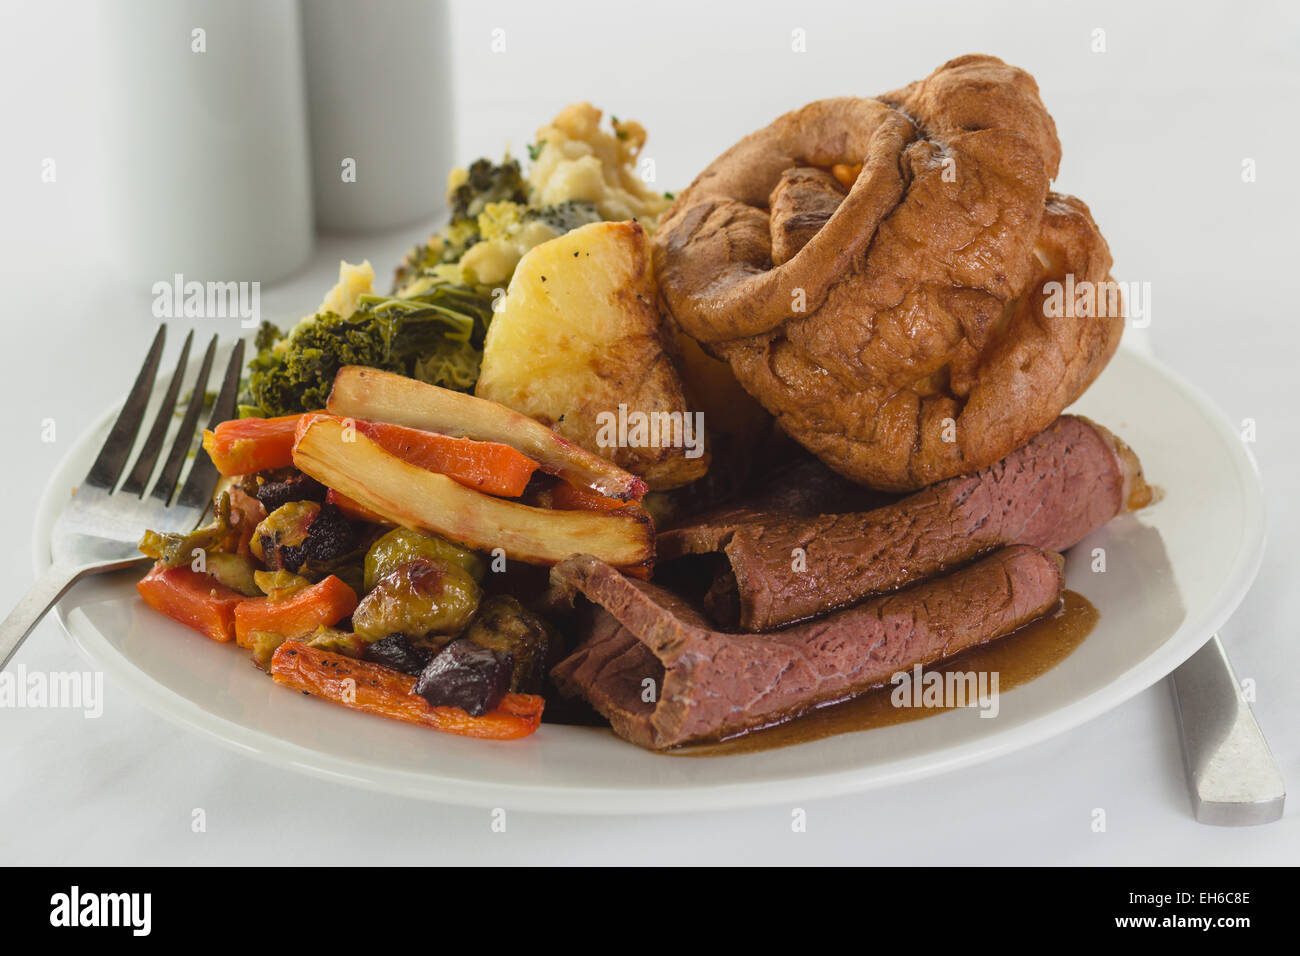 Plated Beef roast dinner with knife and fork on light background Stock Photo